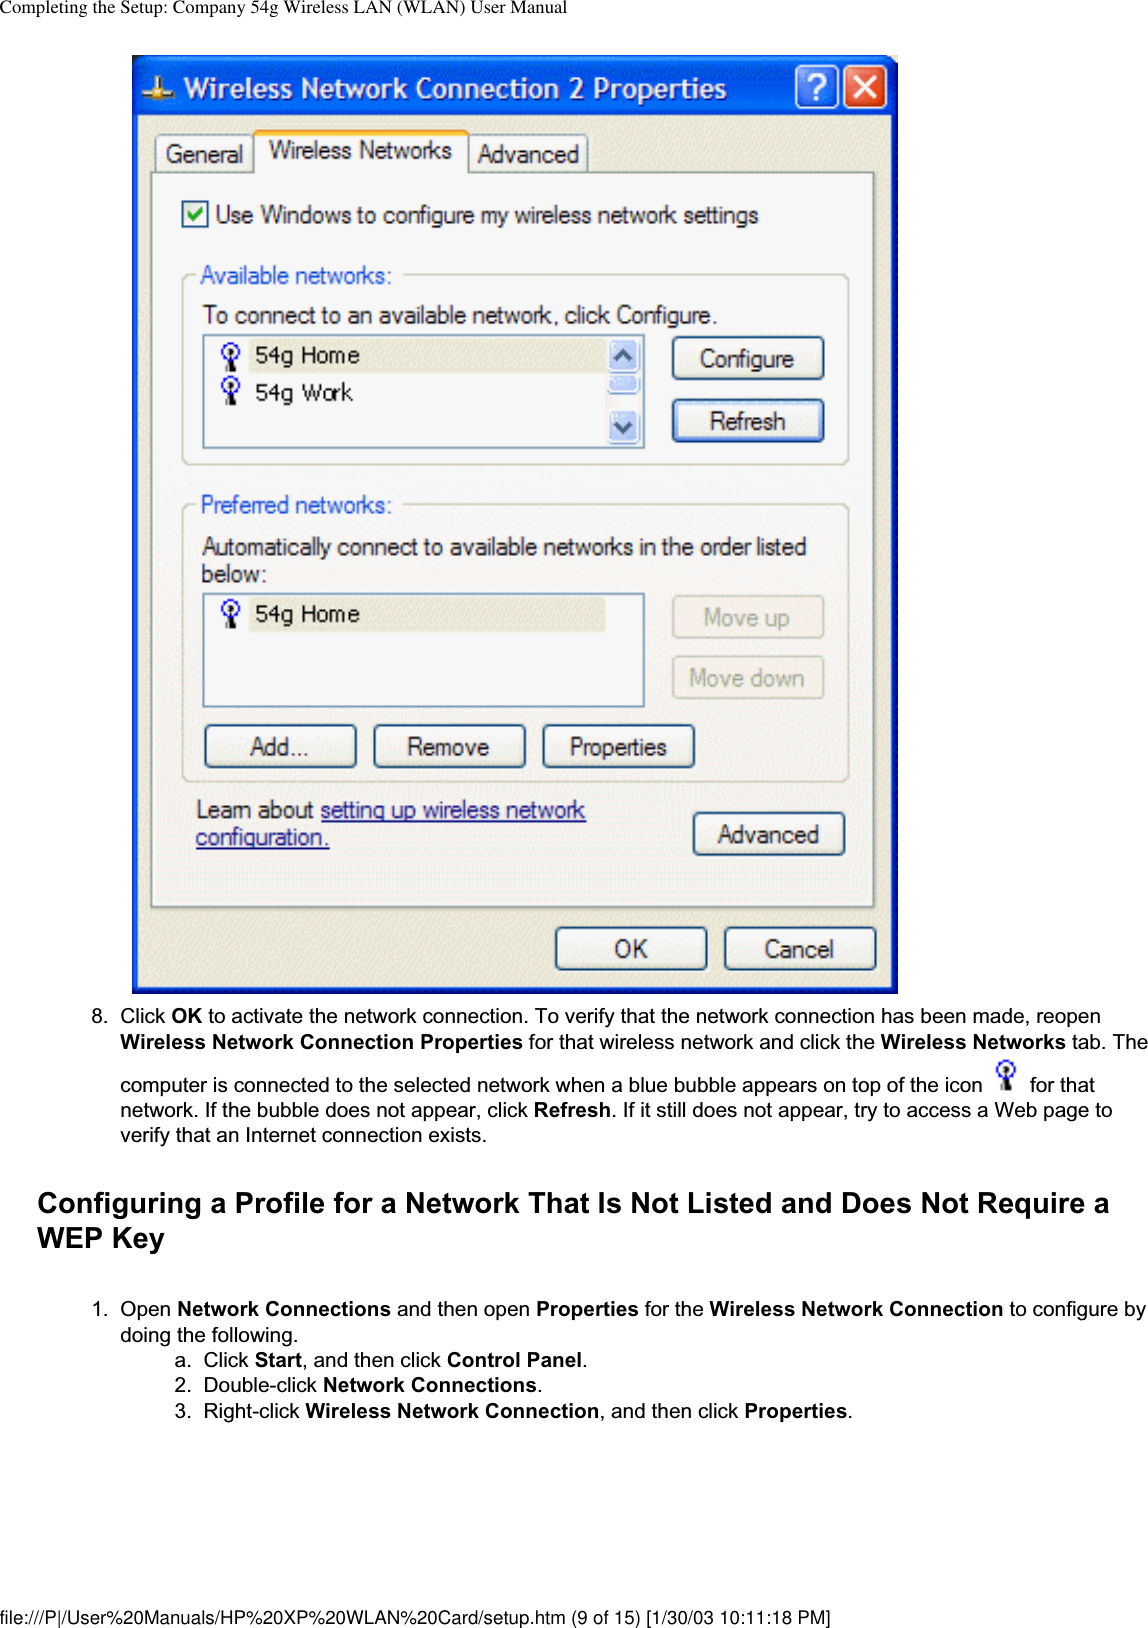 Completing the Setup: Company 54g Wireless LAN (WLAN) User Manual8. Click OK to activate the network connection. To verify that the network connection has been made, reopen Wireless Network Connection Properties for that wireless network and click the Wireless Networks tab. The computer is connected to the selected network when a blue bubble appears on top of the icon   for that network. If the bubble does not appear, click Refresh. If it still does not appear, try to access a Web page to verify that an Internet connection exists. Configuring a Profile for a Network That Is Not Listed and Does Not Require a WEP Key1. Open Network Connections and then open Properties for the Wireless Network Connection to configure by doing the following. a. Click Start, and then click Control Panel.2. Double-click Network Connections.3. Right-click Wireless Network Connection, and then click Properties.file:///P|/User%20Manuals/HP%20XP%20WLAN%20Card/setup.htm (9 of 15) [1/30/03 10:11:18 PM]